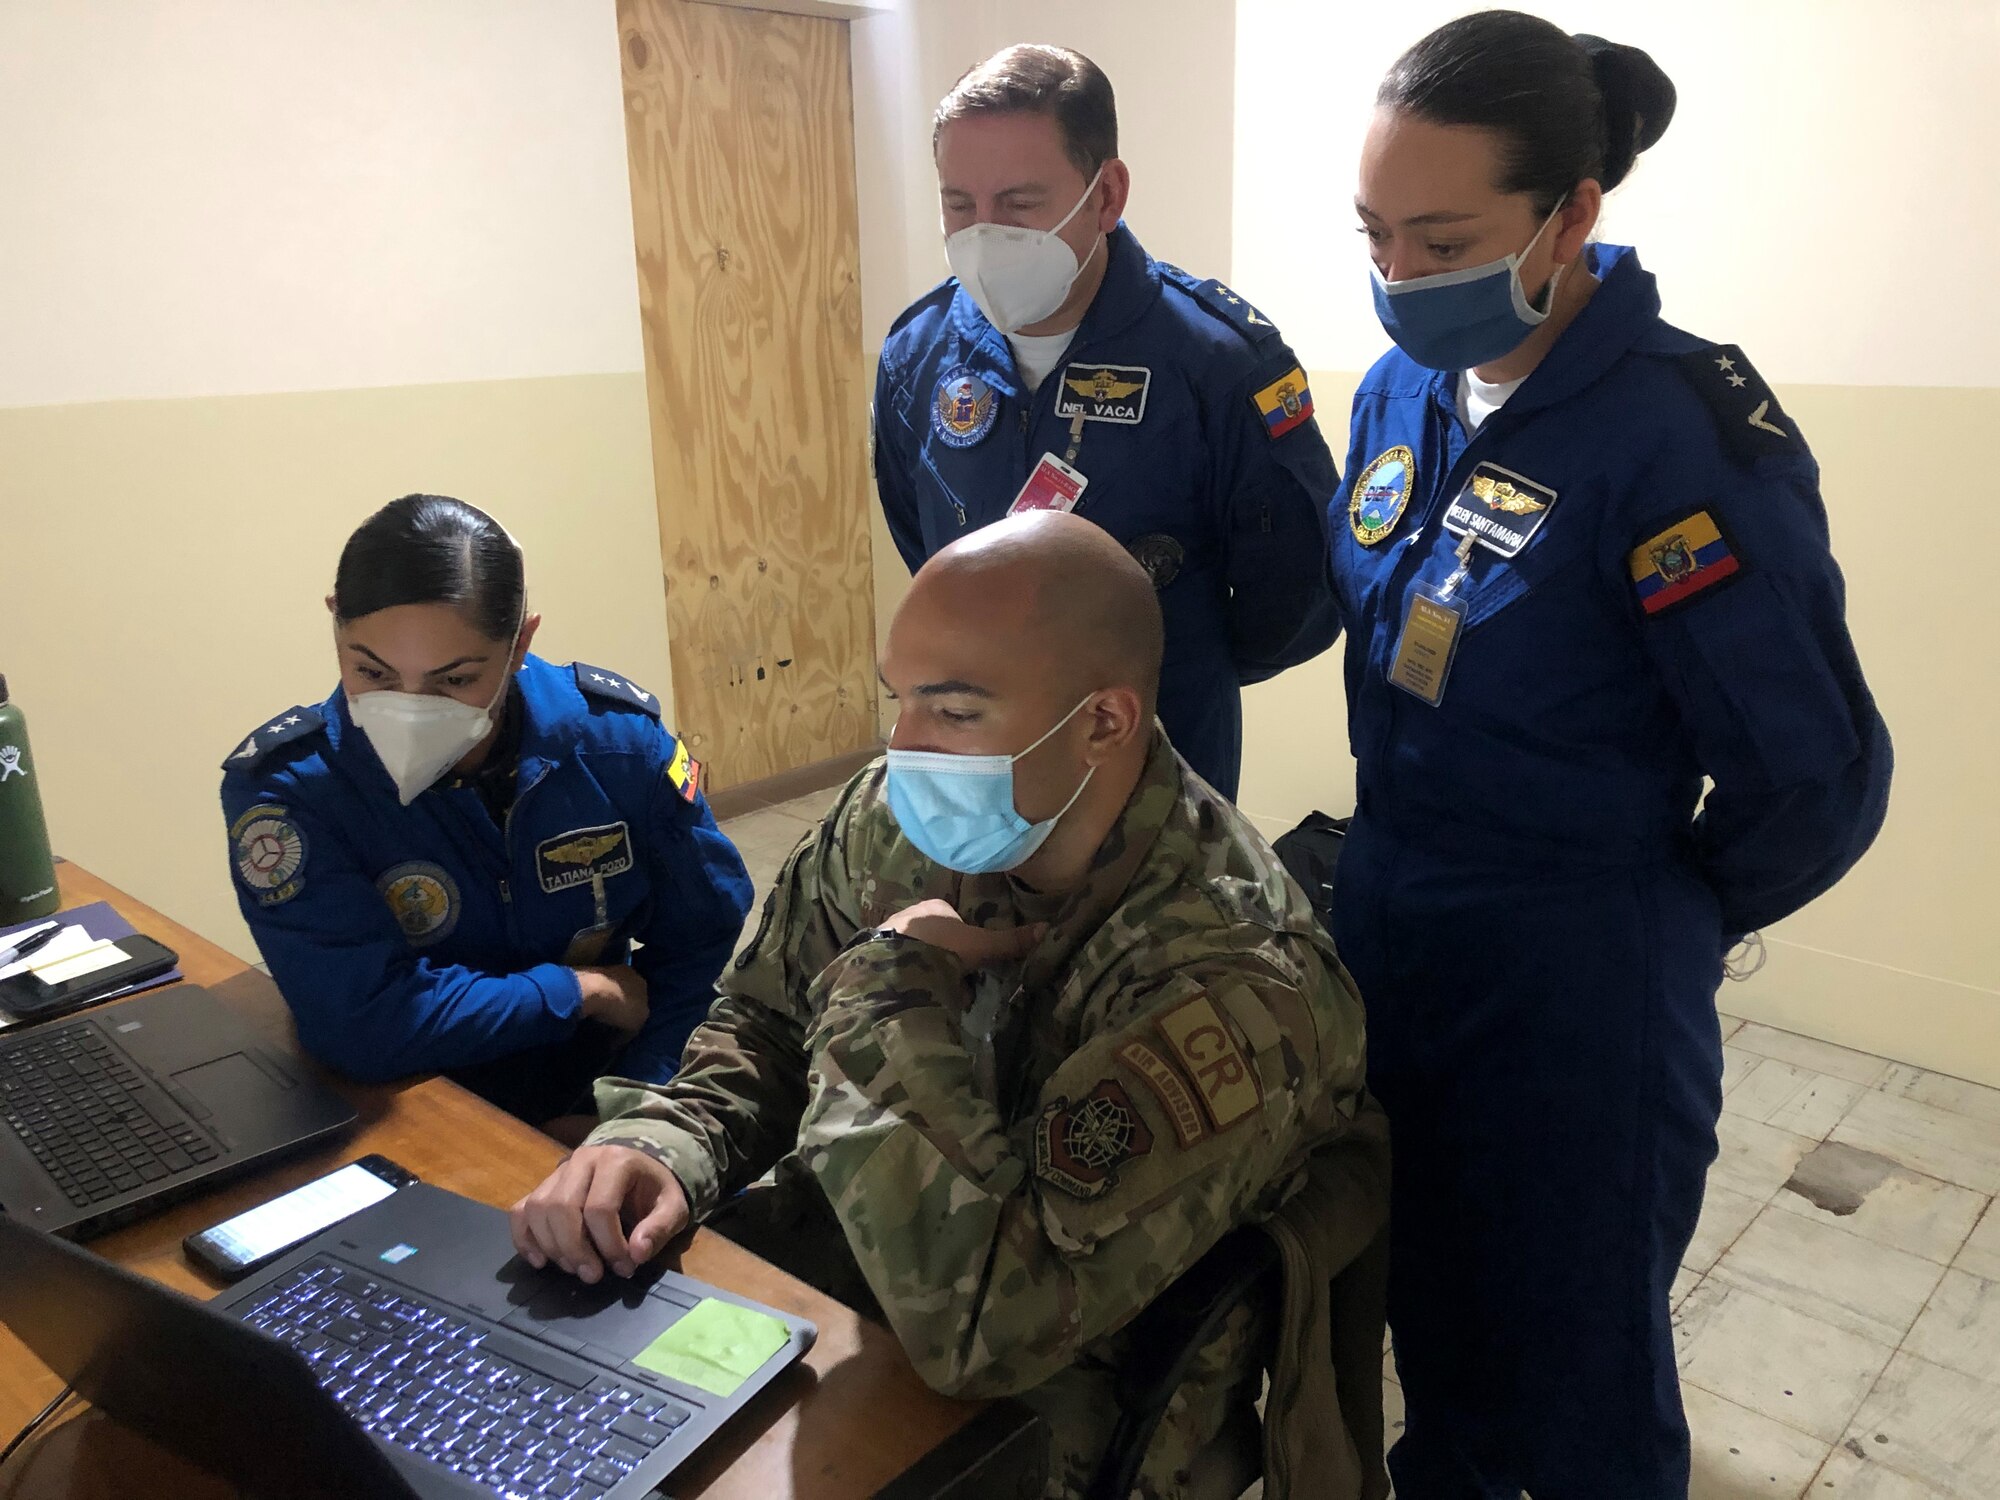 U.S. Air Force Tech. Sgt. James Garcia Arvelo, 571st Mobility Support Advisory Squadron materiel management lead air advisor, demonstrates supply systems up close with members of the Fuerza Aérea Ecuatoriana July 22, 2020, at Cotopaxi Air Force Base in Latacunga, Ecuador.  (U.S. Air Force photo by Capt. Kaitlin Morones)